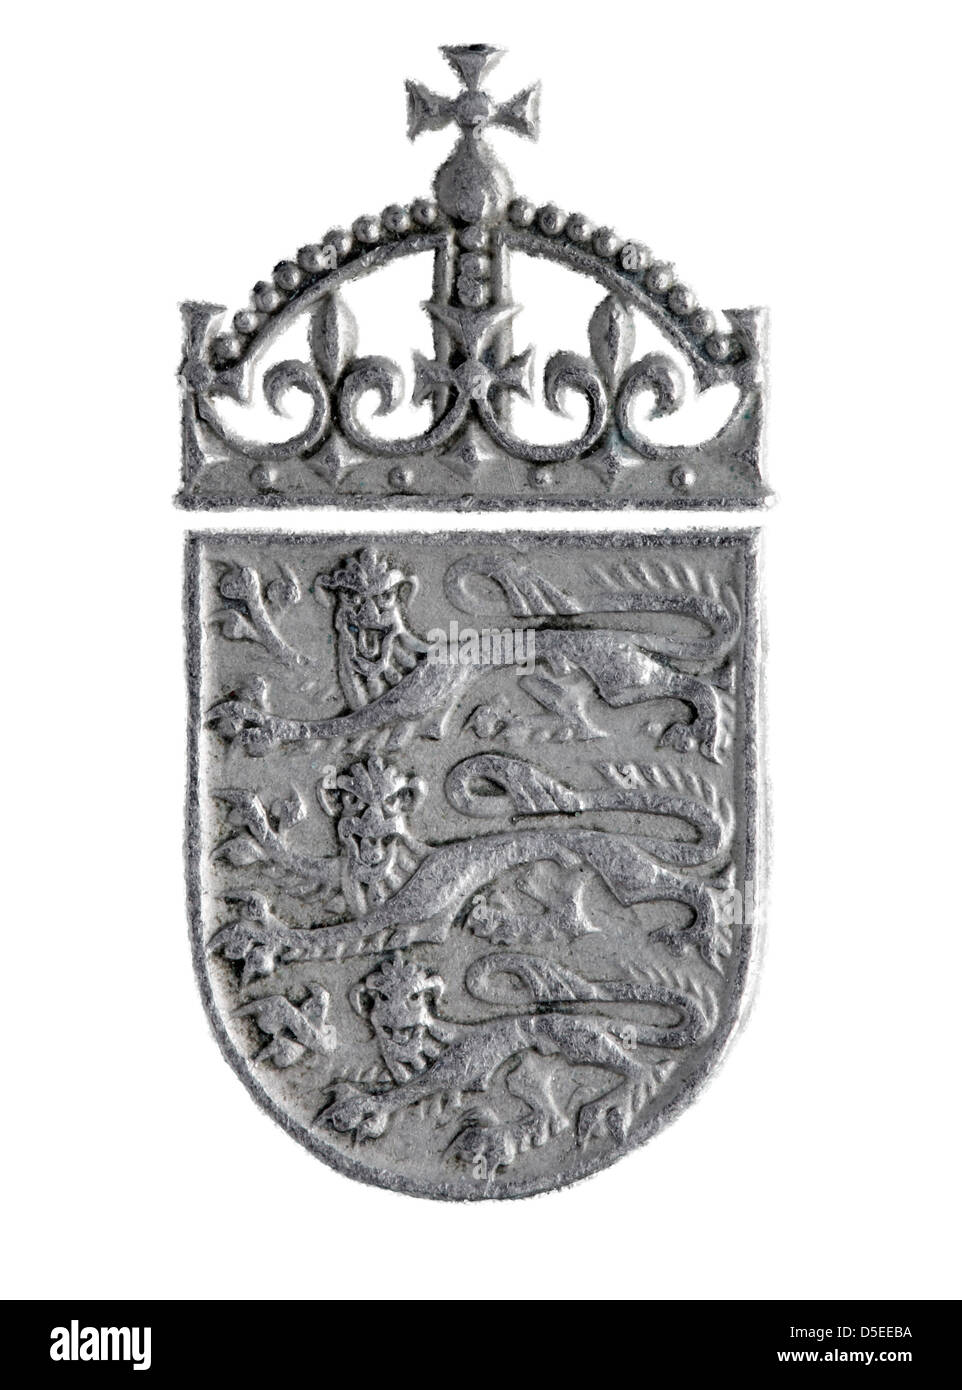 English shield from 1 Shilling coin, UK, 1955, on white background Stock Photo